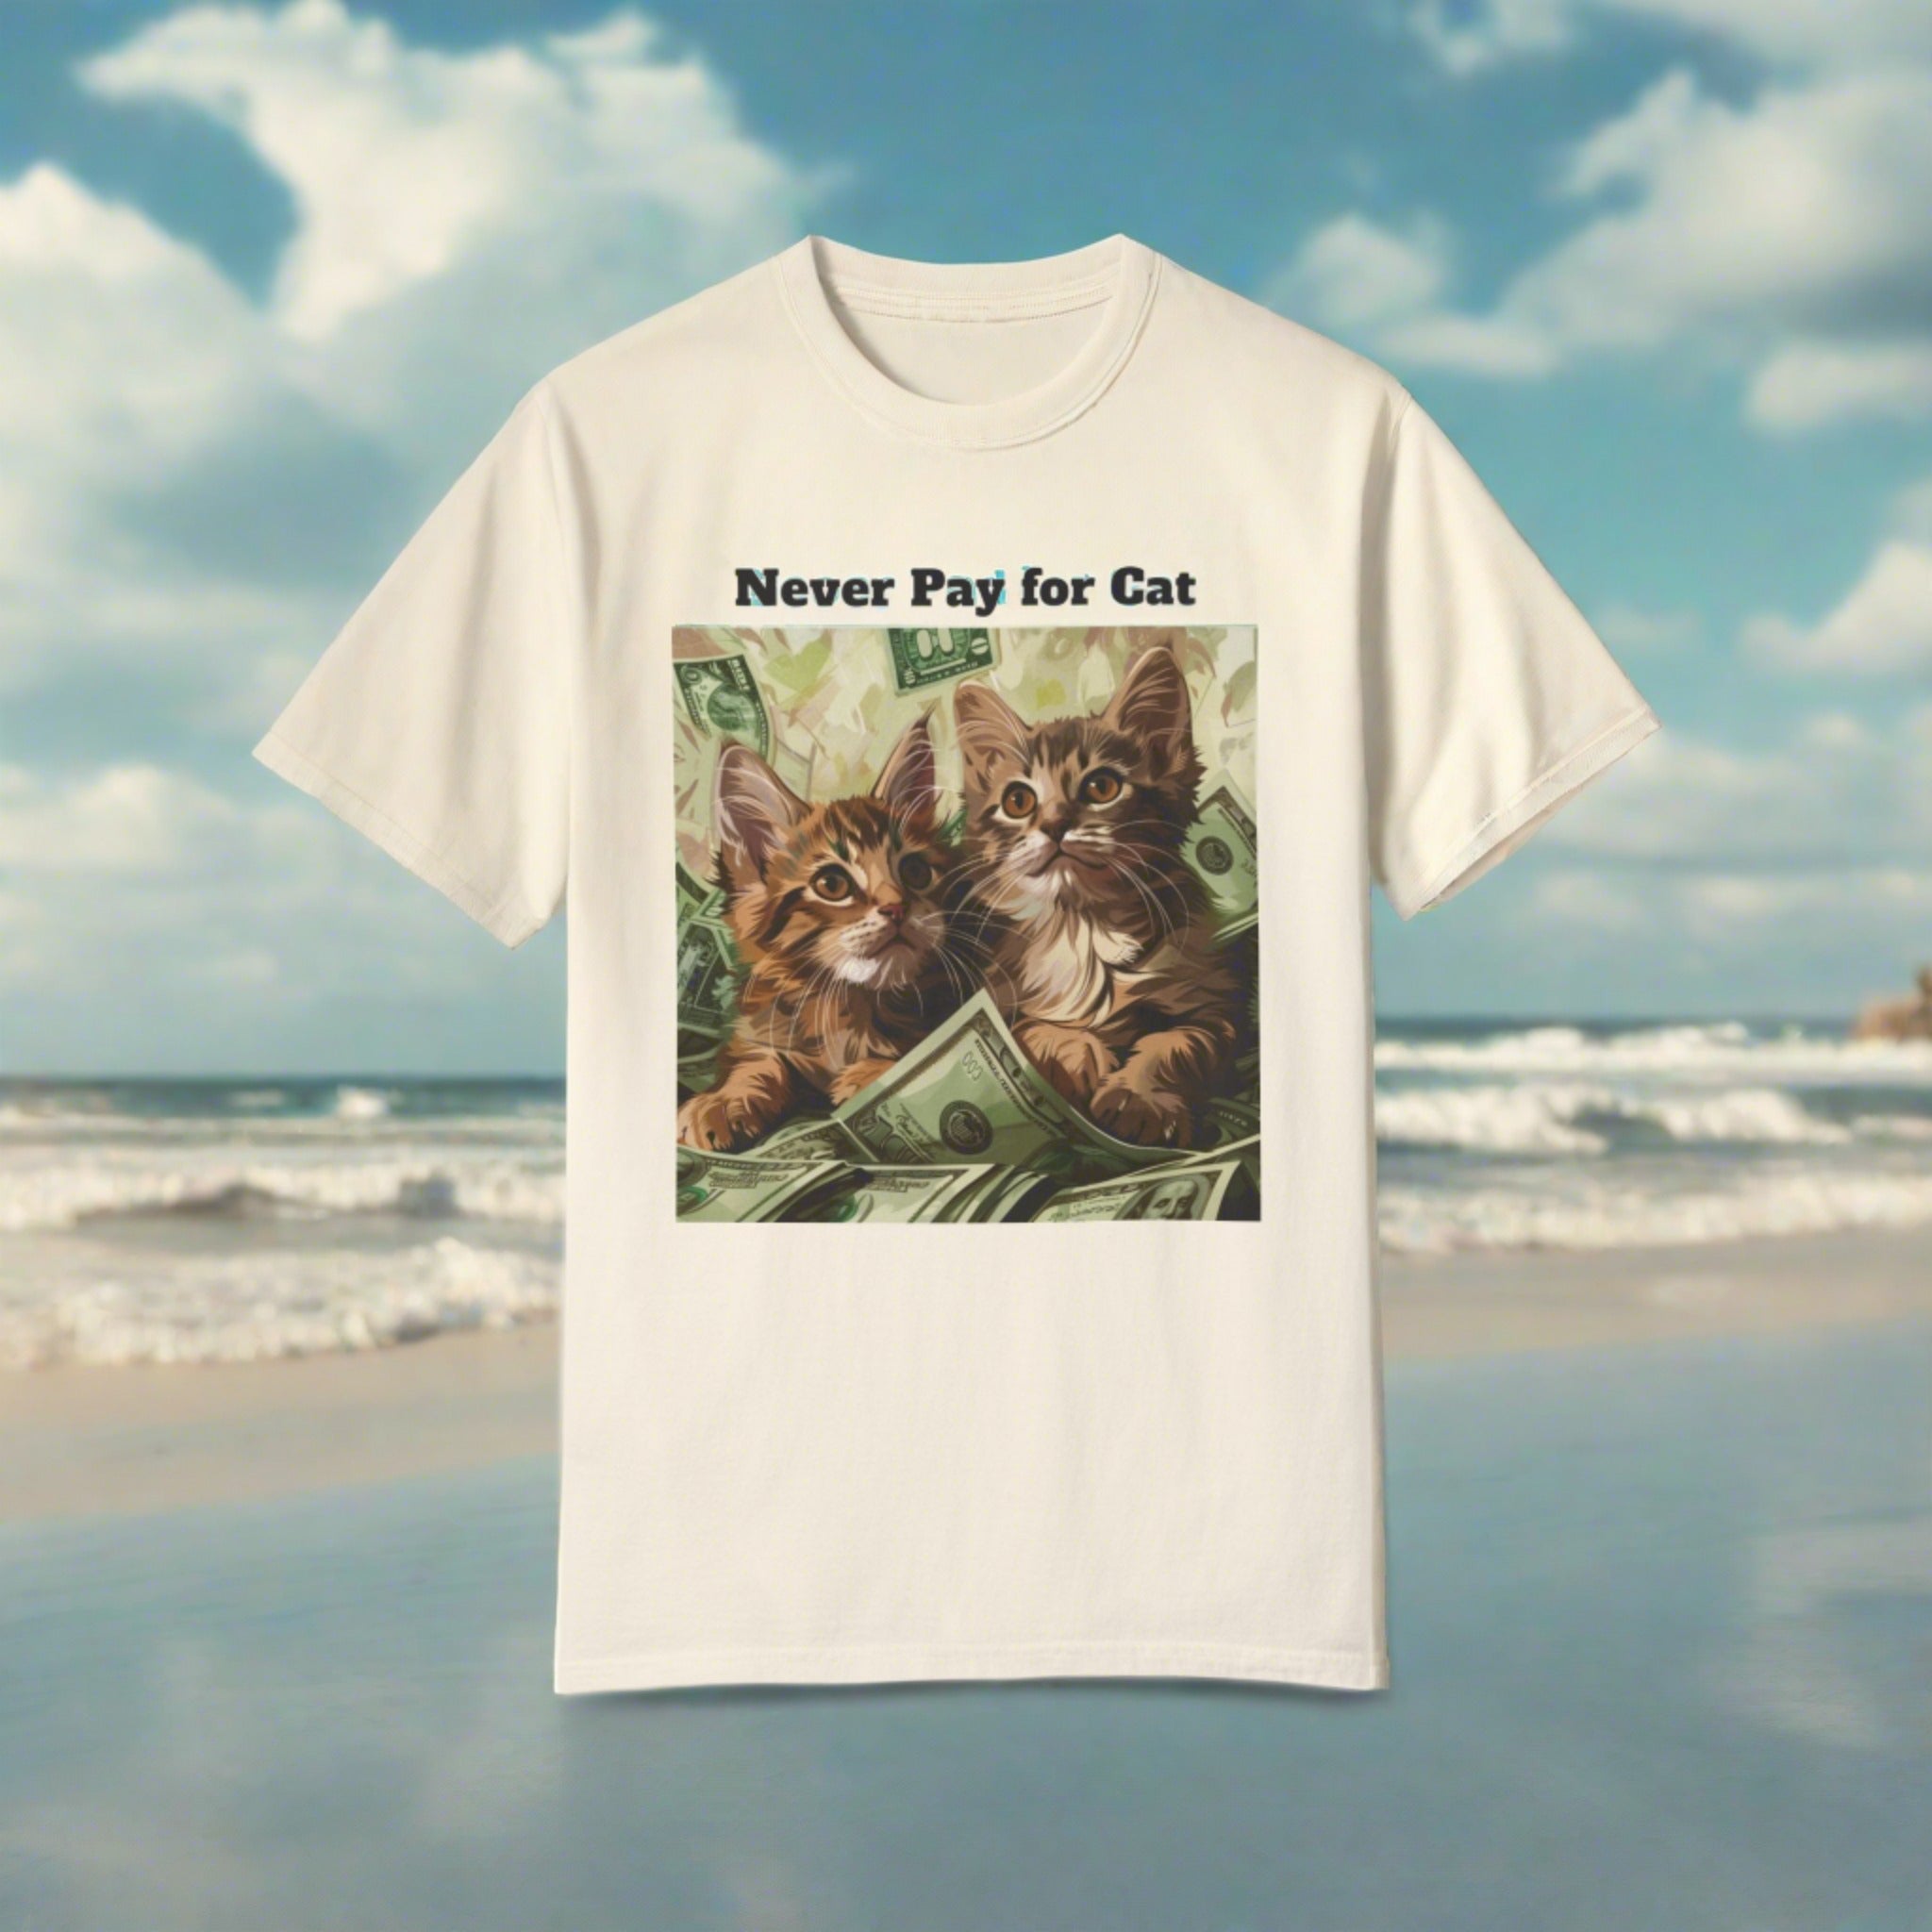 The image presents a unisex garment-dyed t-shirt in a relaxed fit, showcasing an adorable and humorous graphic of kittens frolicking in a pile of cash, with the witty phrase "Never Pay for Cat Dating" prominently displayed. The playful design is set against the shirt's high-quality, soft fabric, highlighting both the art's detail and the garment's comfortable feel.